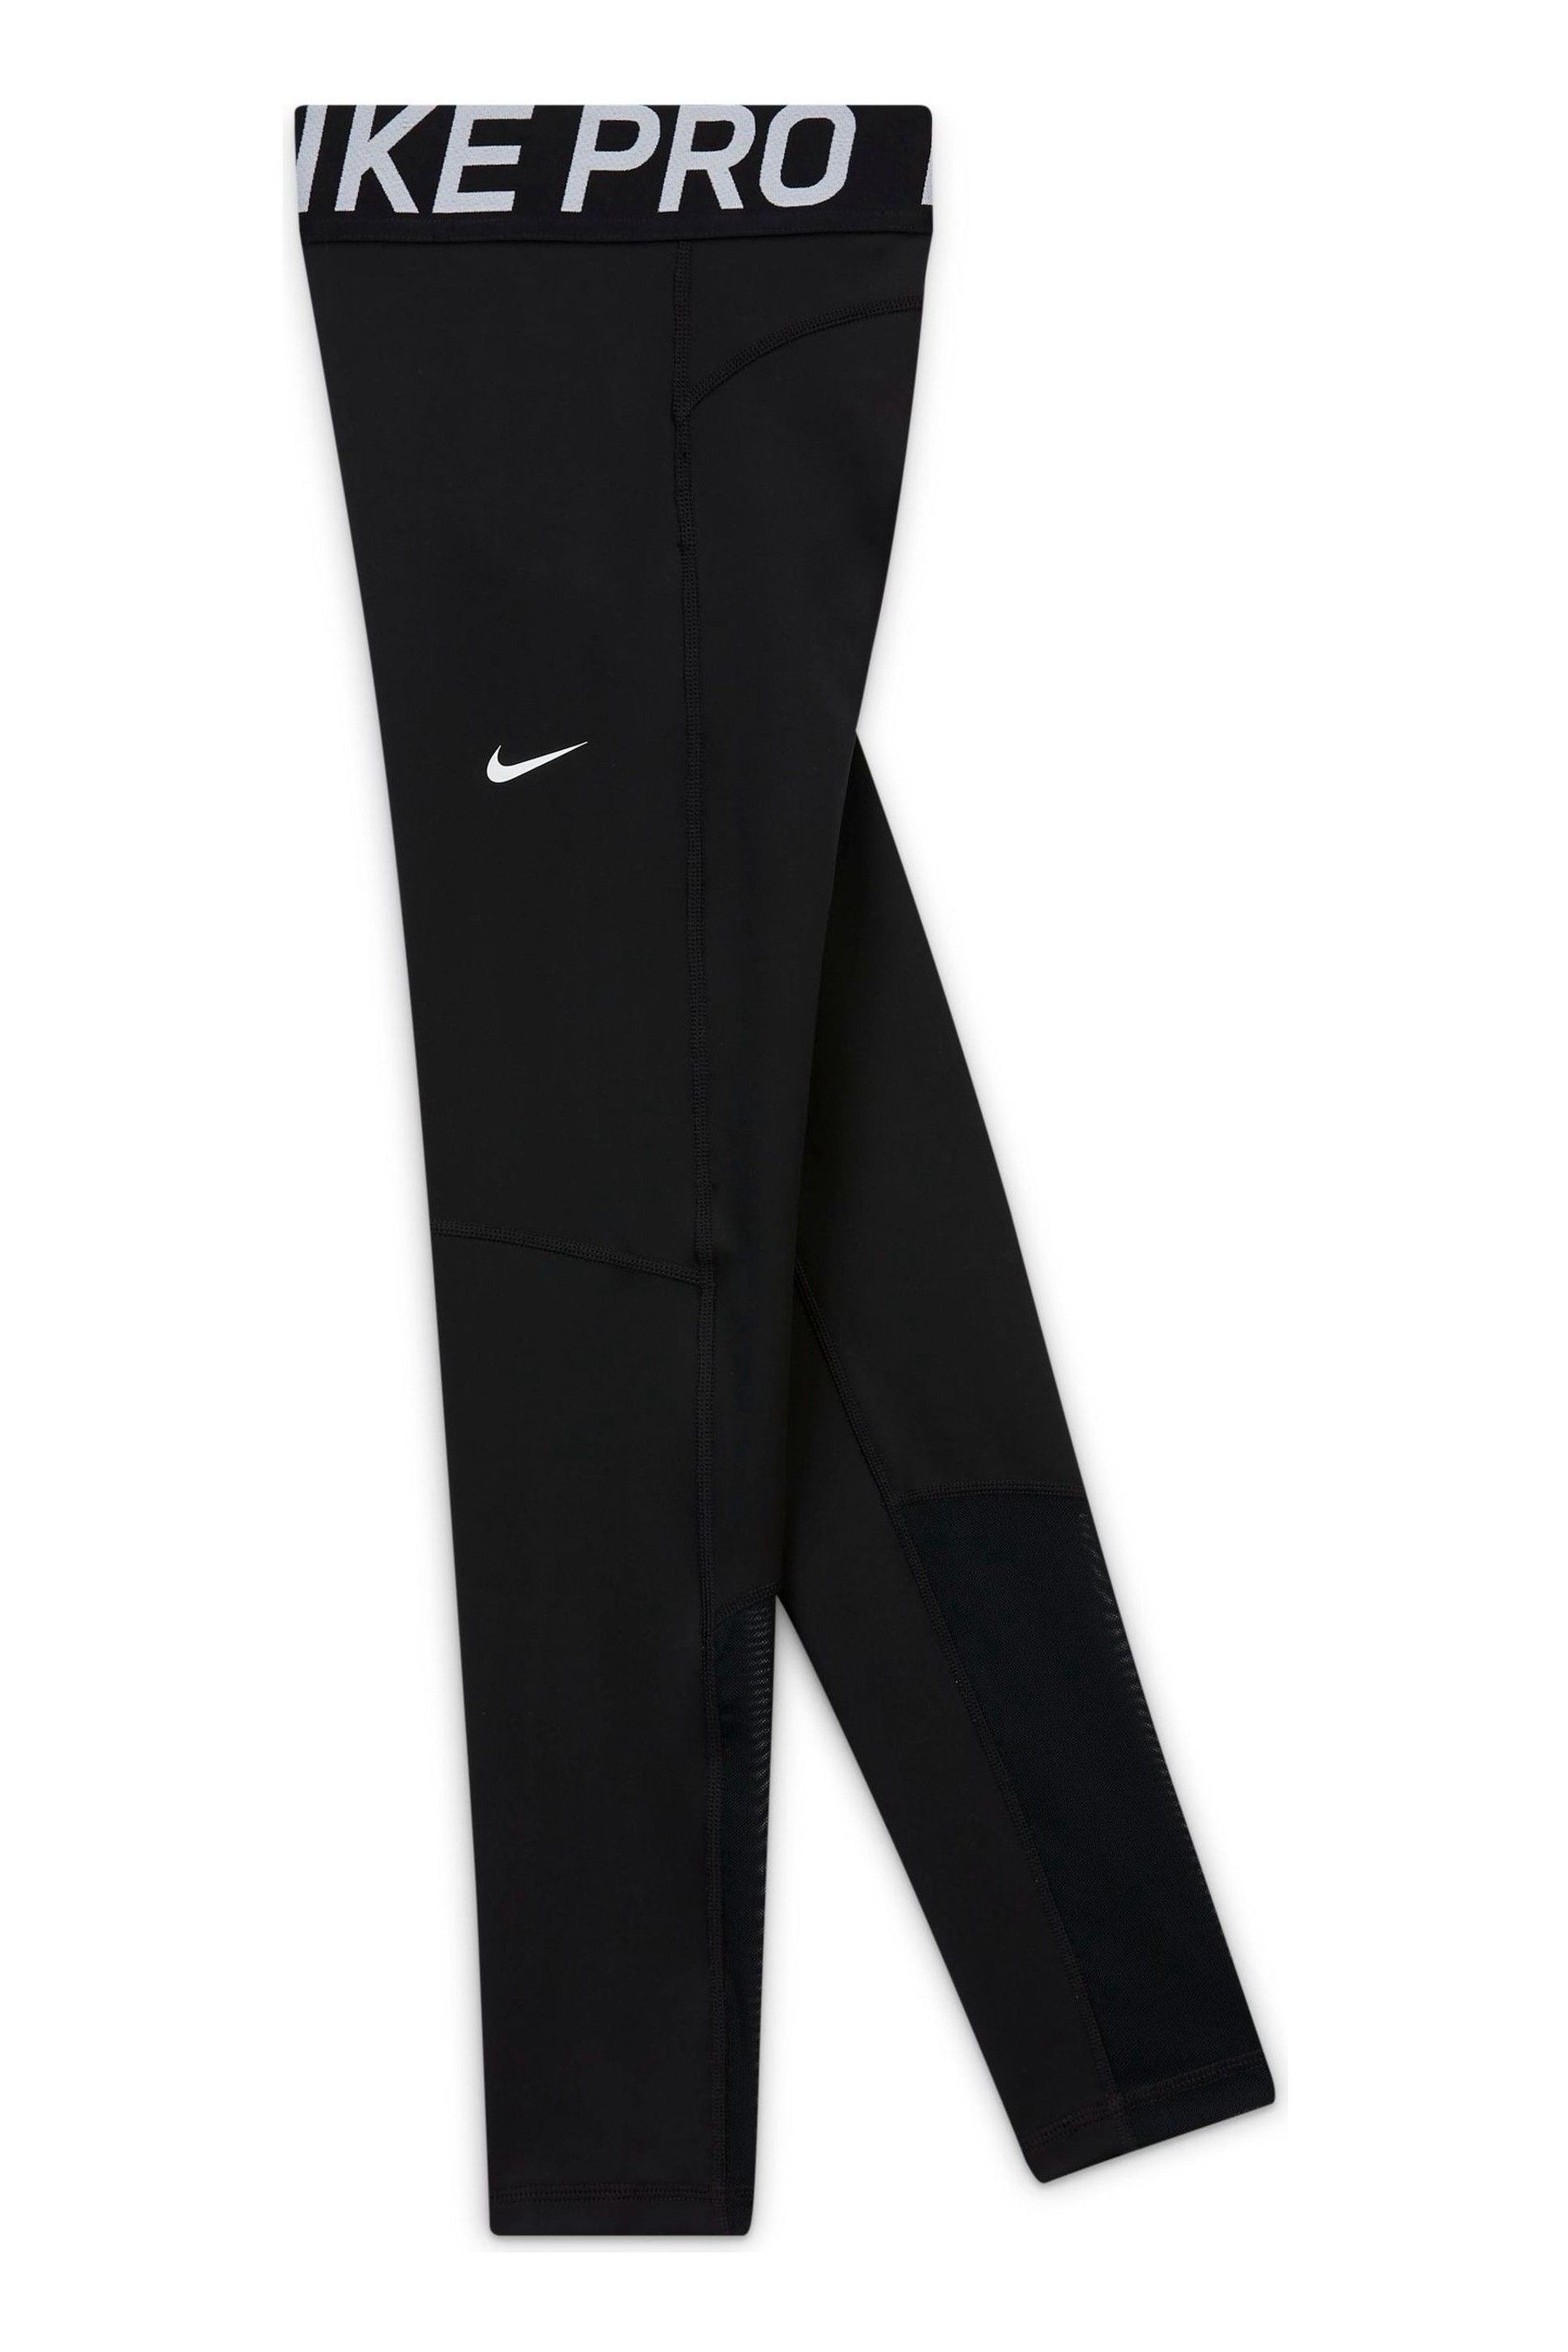 Nike Pro Women's High-Waisted Leggings with Pockets, Light Curry/White,  X-Small at Amazon Women's Clothing store